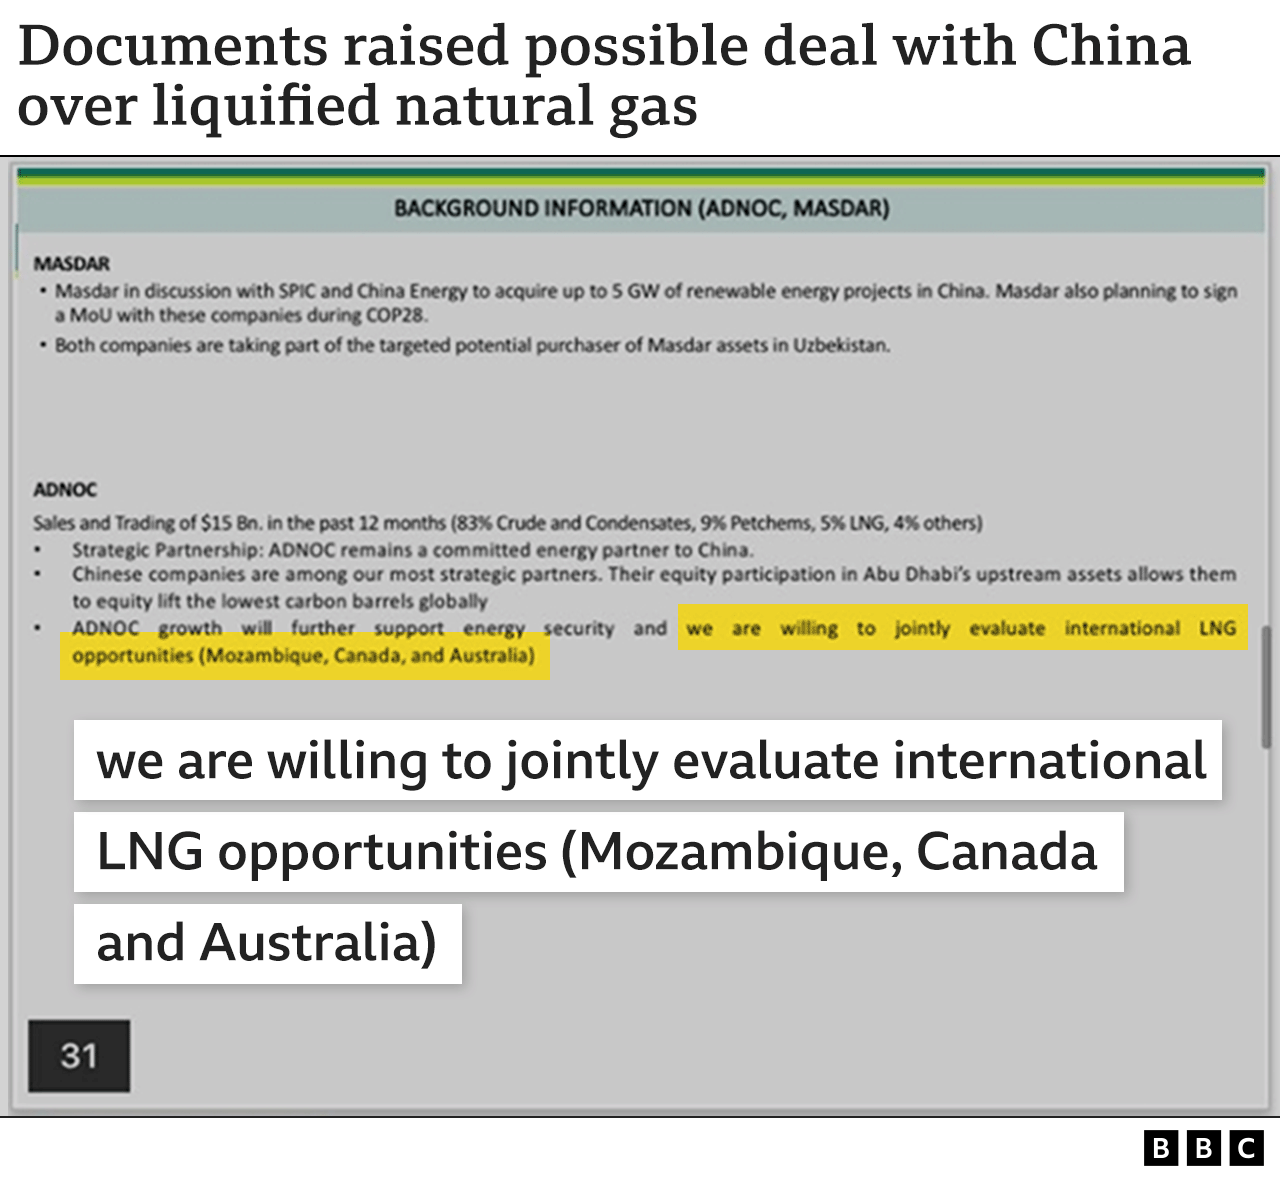 Graphic showing quotes from briefing document for the UAE COP28 team's meeting with China, saying they were "willing to jointly evaluate international LNG opportunities (Mozambique, Canada, Australia)"